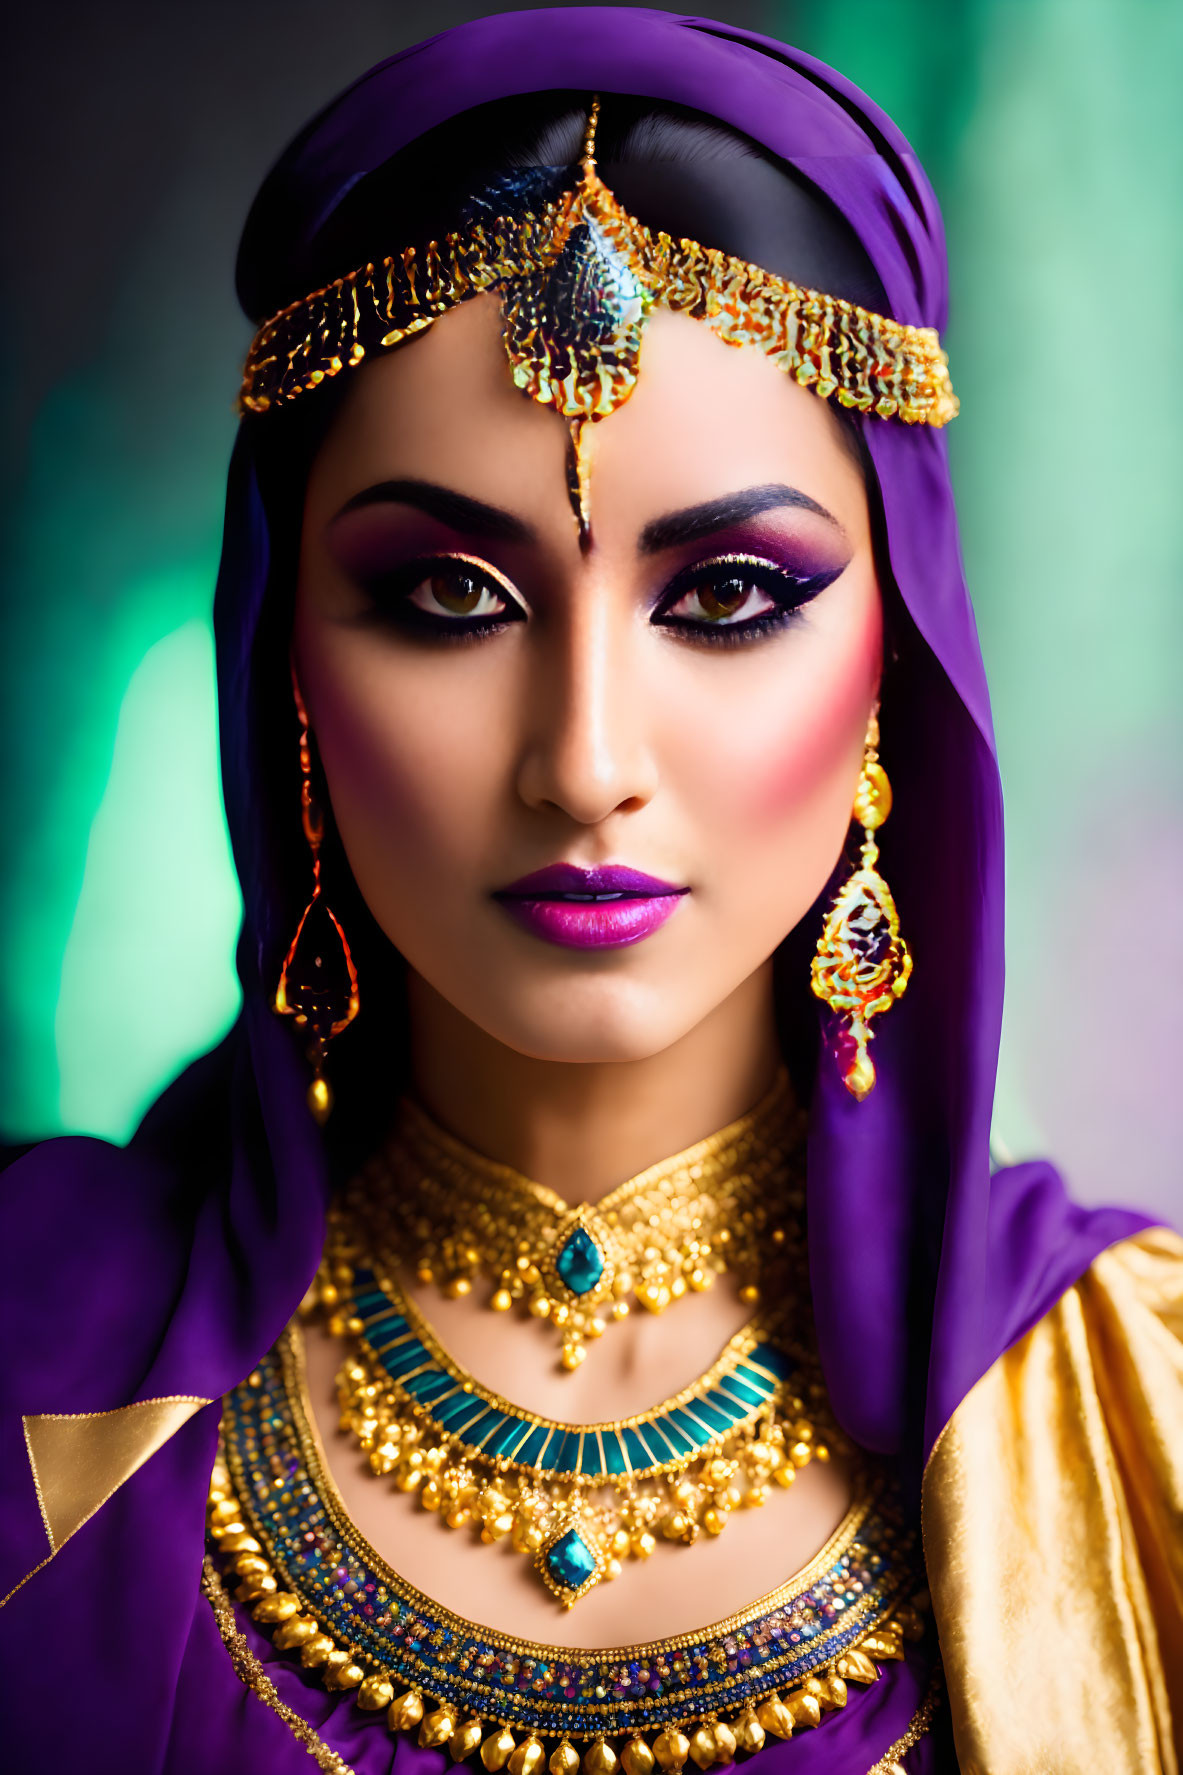 Traditional Attire: Rich Purple & Gold with Elaborate Jewelry & Headpiece